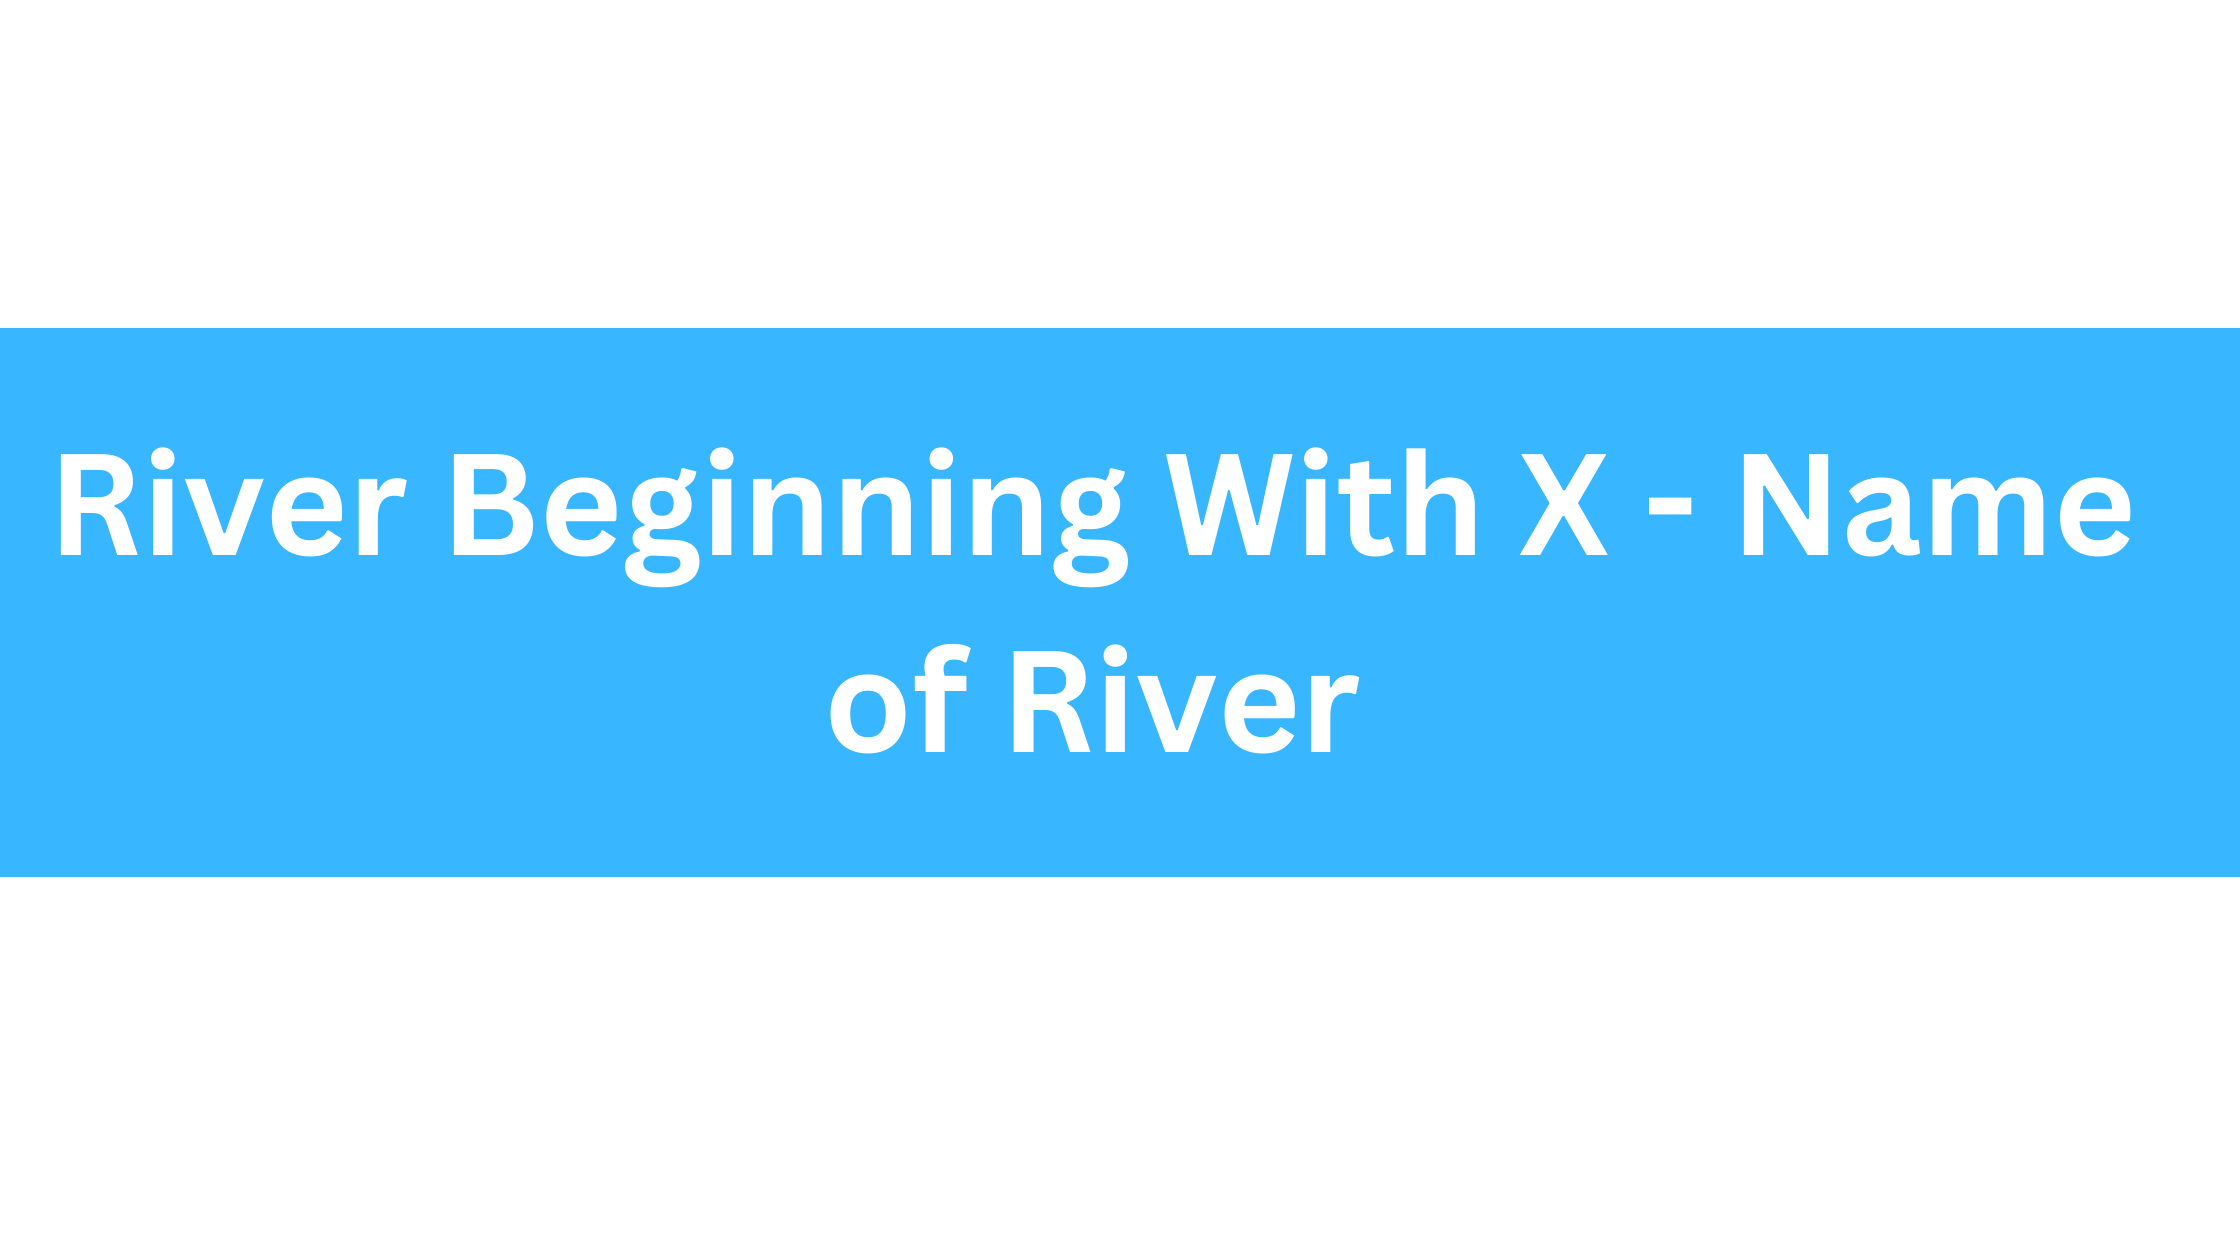 River Beginning With X